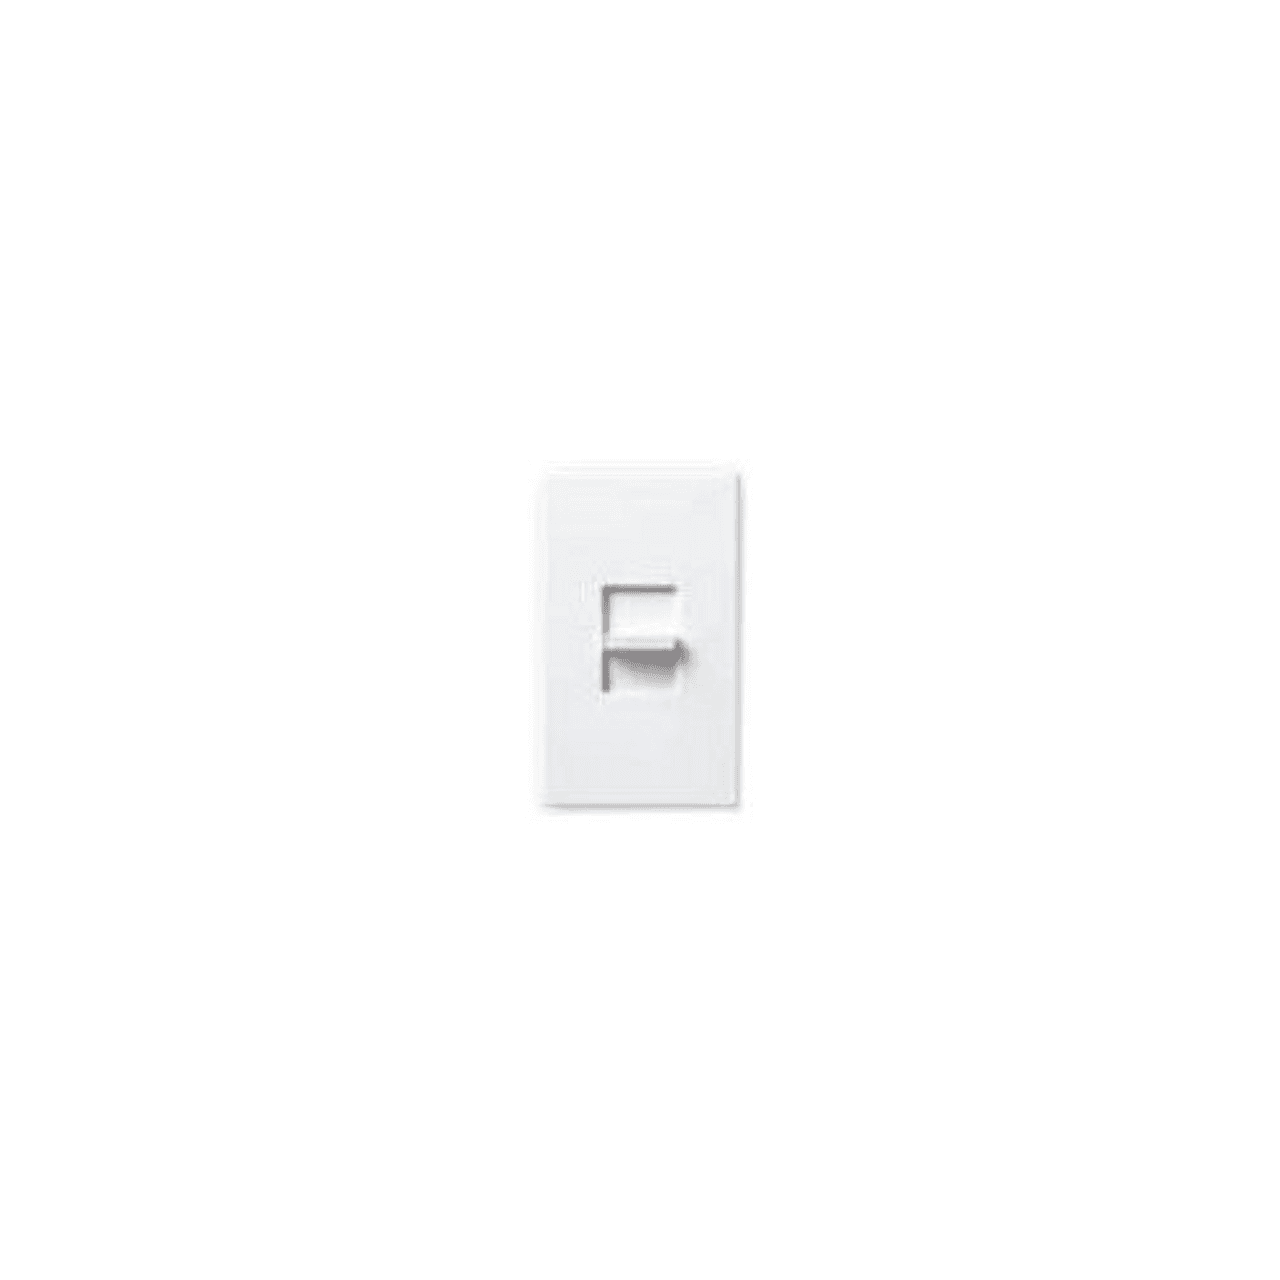 Lutron N-S-NFB-WH Lutron N-S-NFB-WH Wallplates and Switch Accessories EA